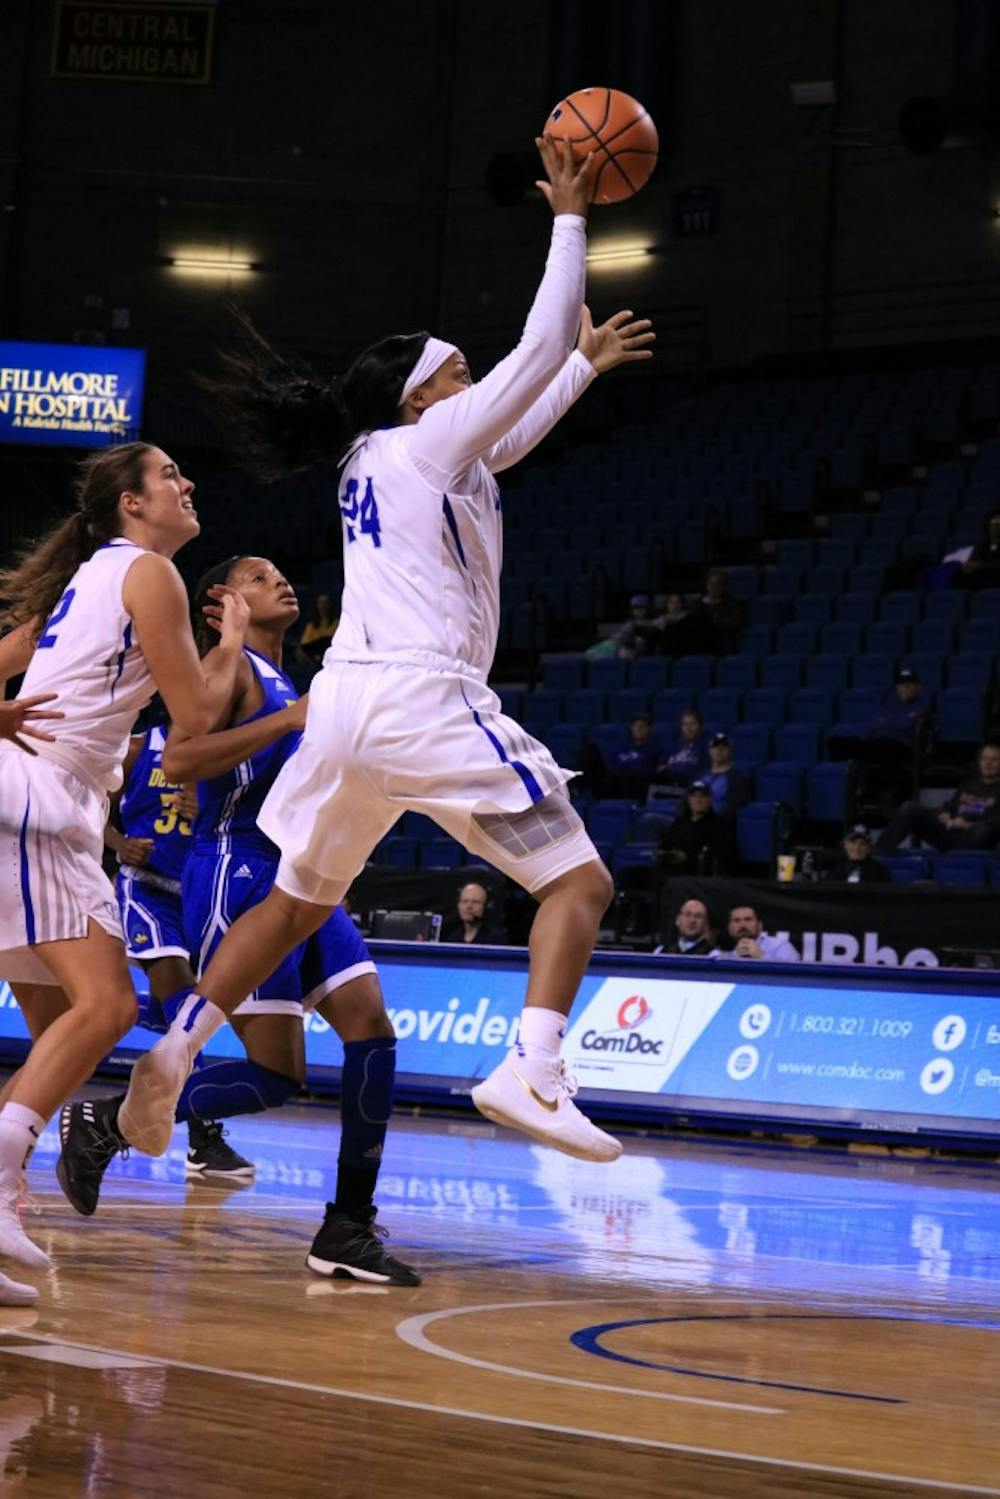 <p>Senior guard Cierra Dillard goes for the layup while pressed in the paint. Dillard was the lead scorer for the Bulls last season and hopes to improve.</p>